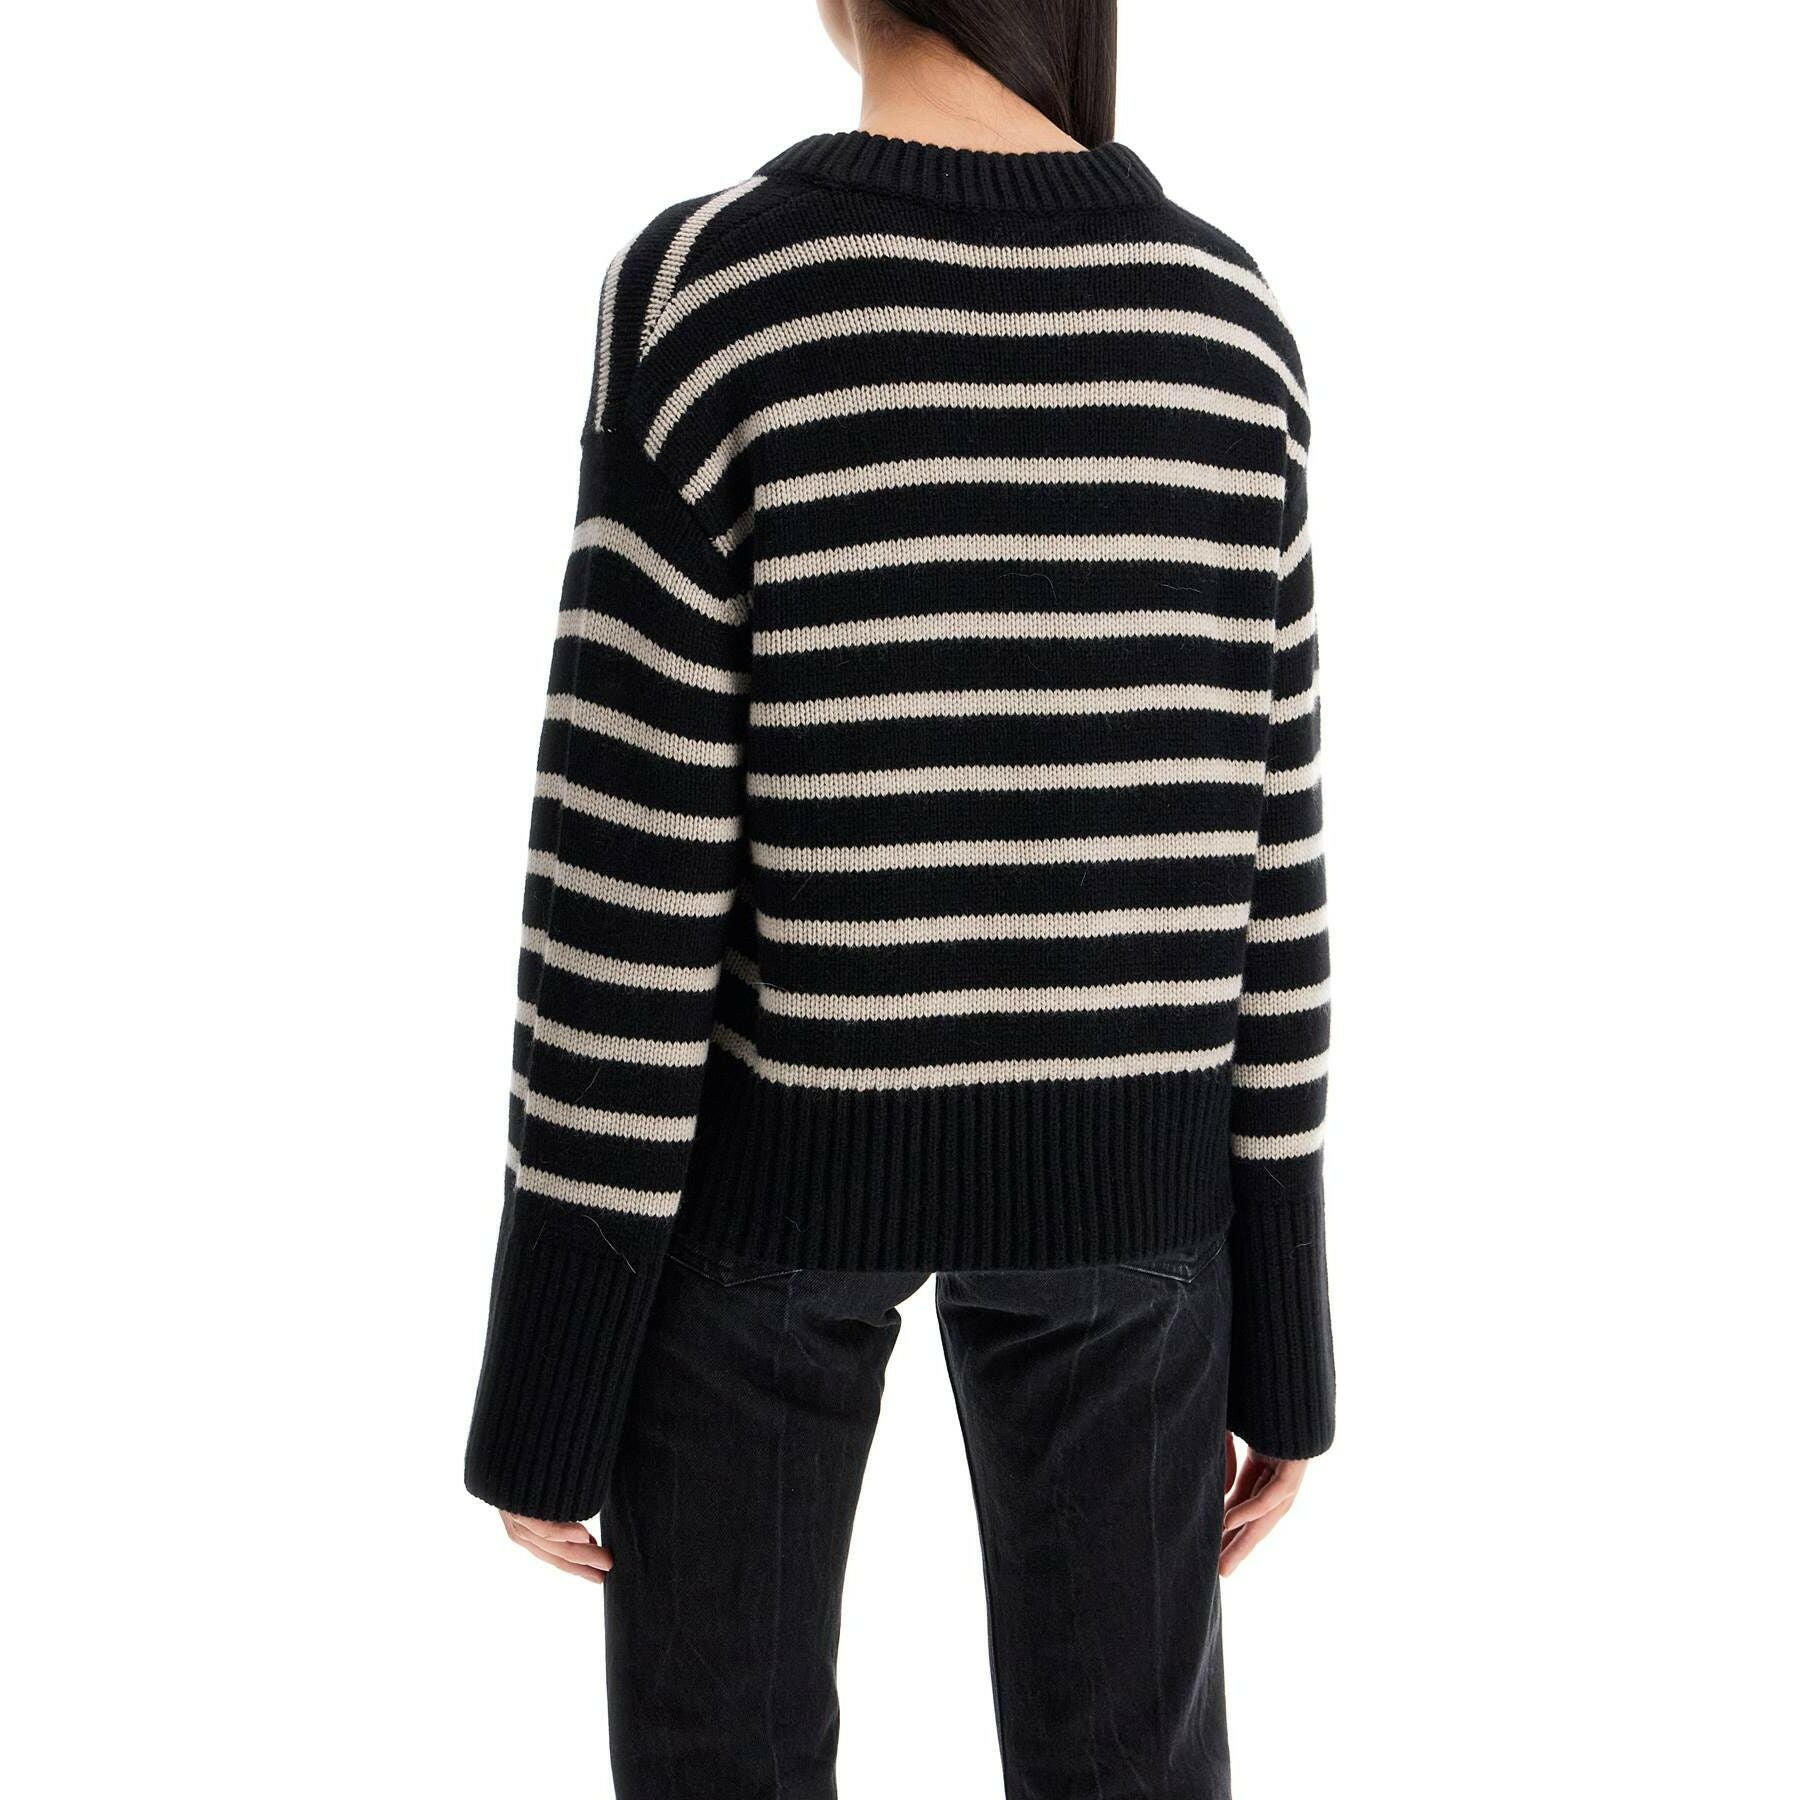 Striped Cashmere Sony Pullover Sweater.